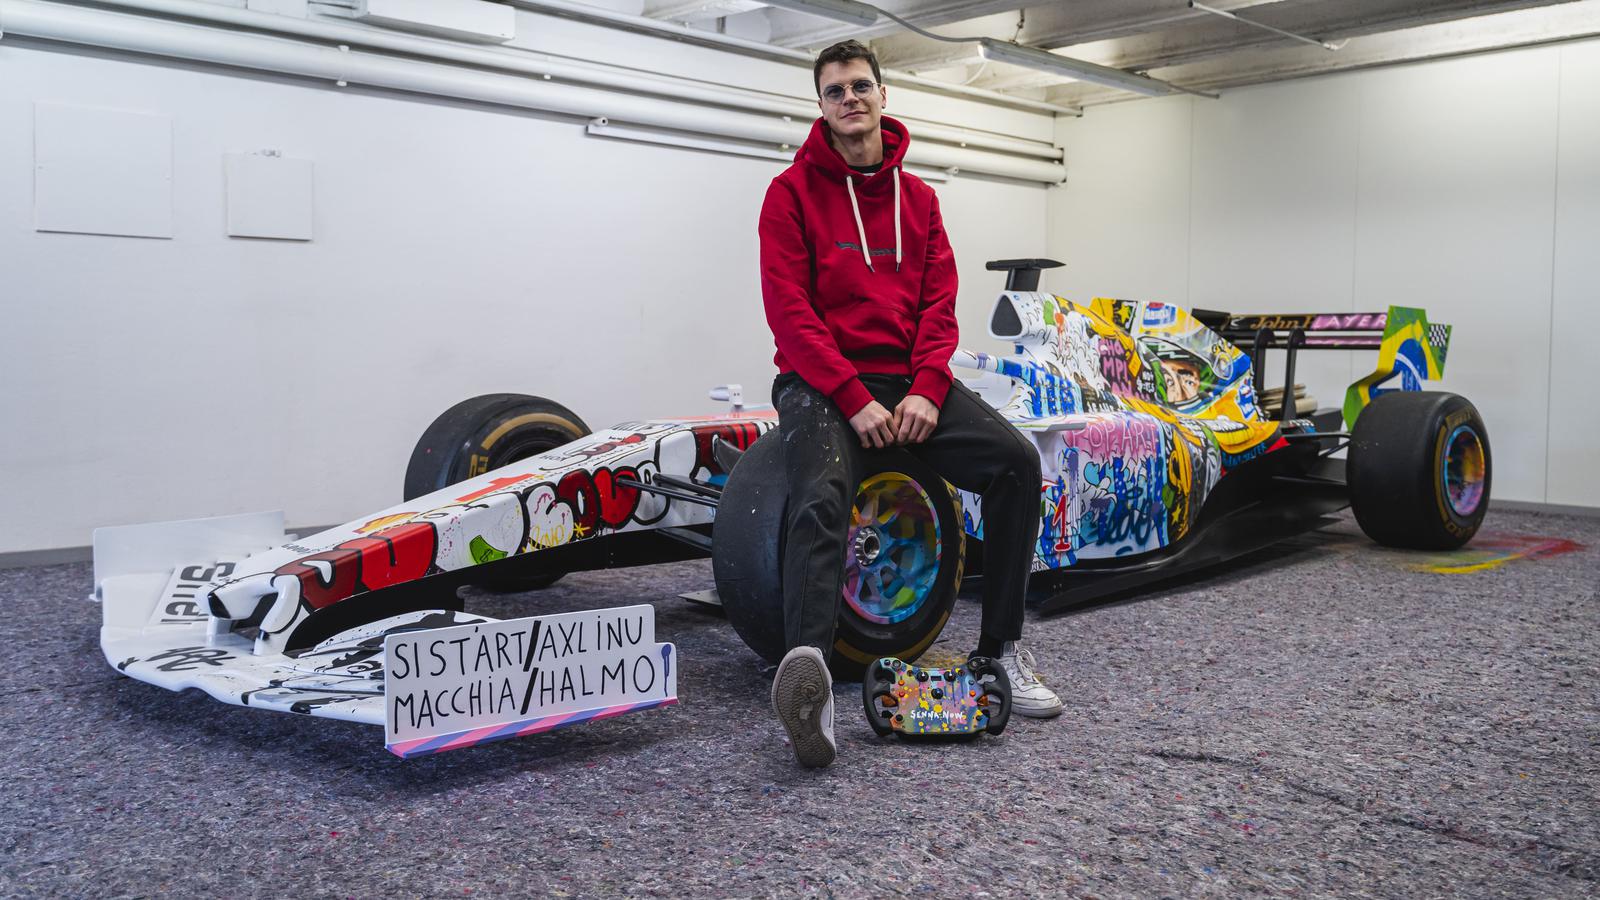 Jisbar starring on a new project : painting a Formula 1 showcar in honour of Ayrton Senna